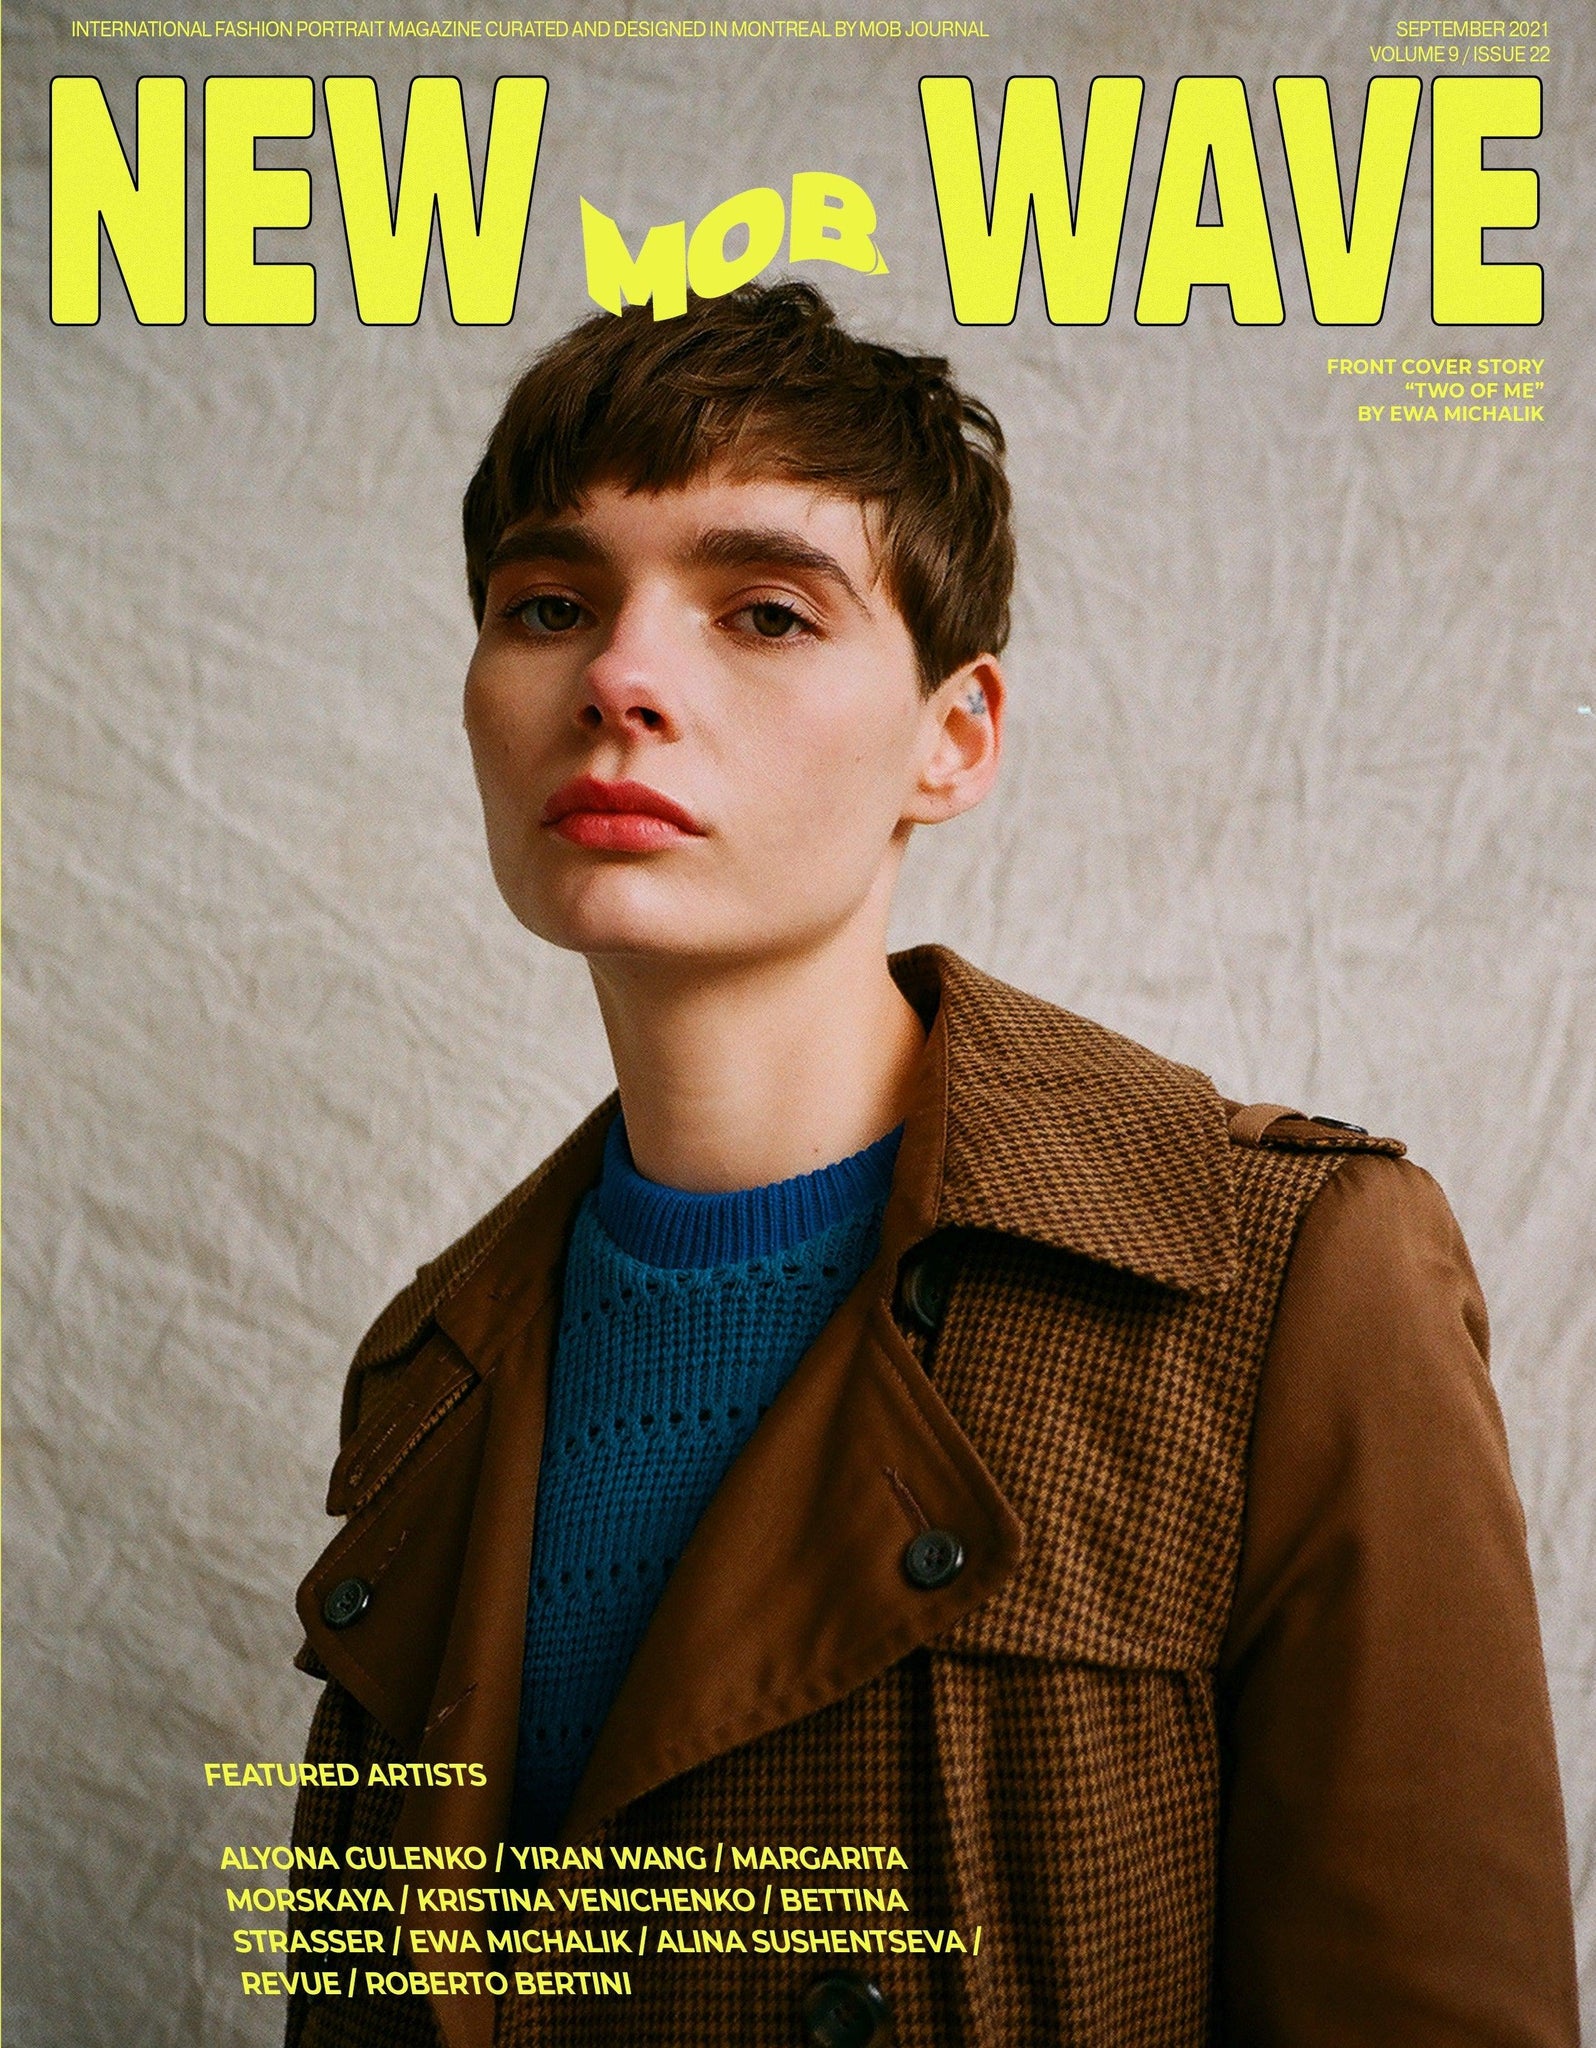 NEW WAVE | VOLUME NINE | ISSUE #22 - Mob Journal